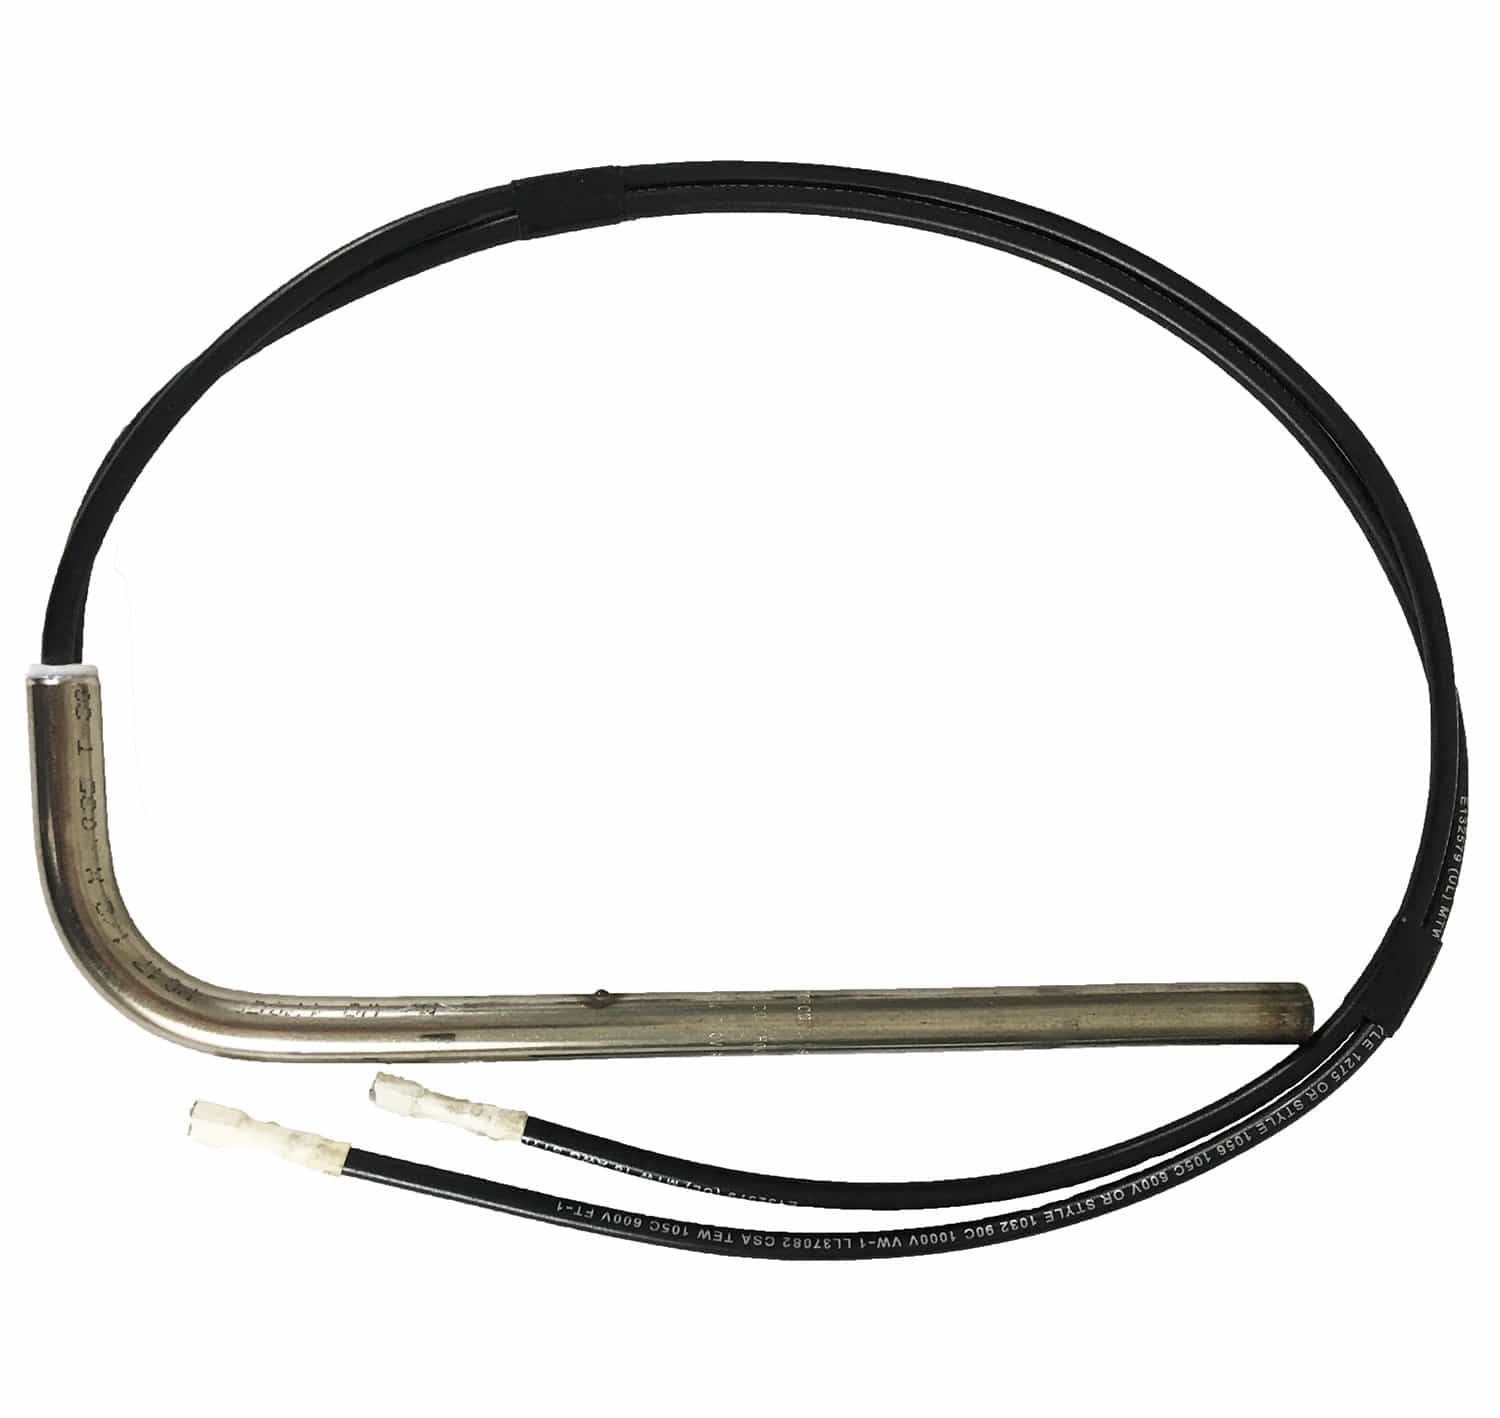 Norcold 61562522 AC Heating Element